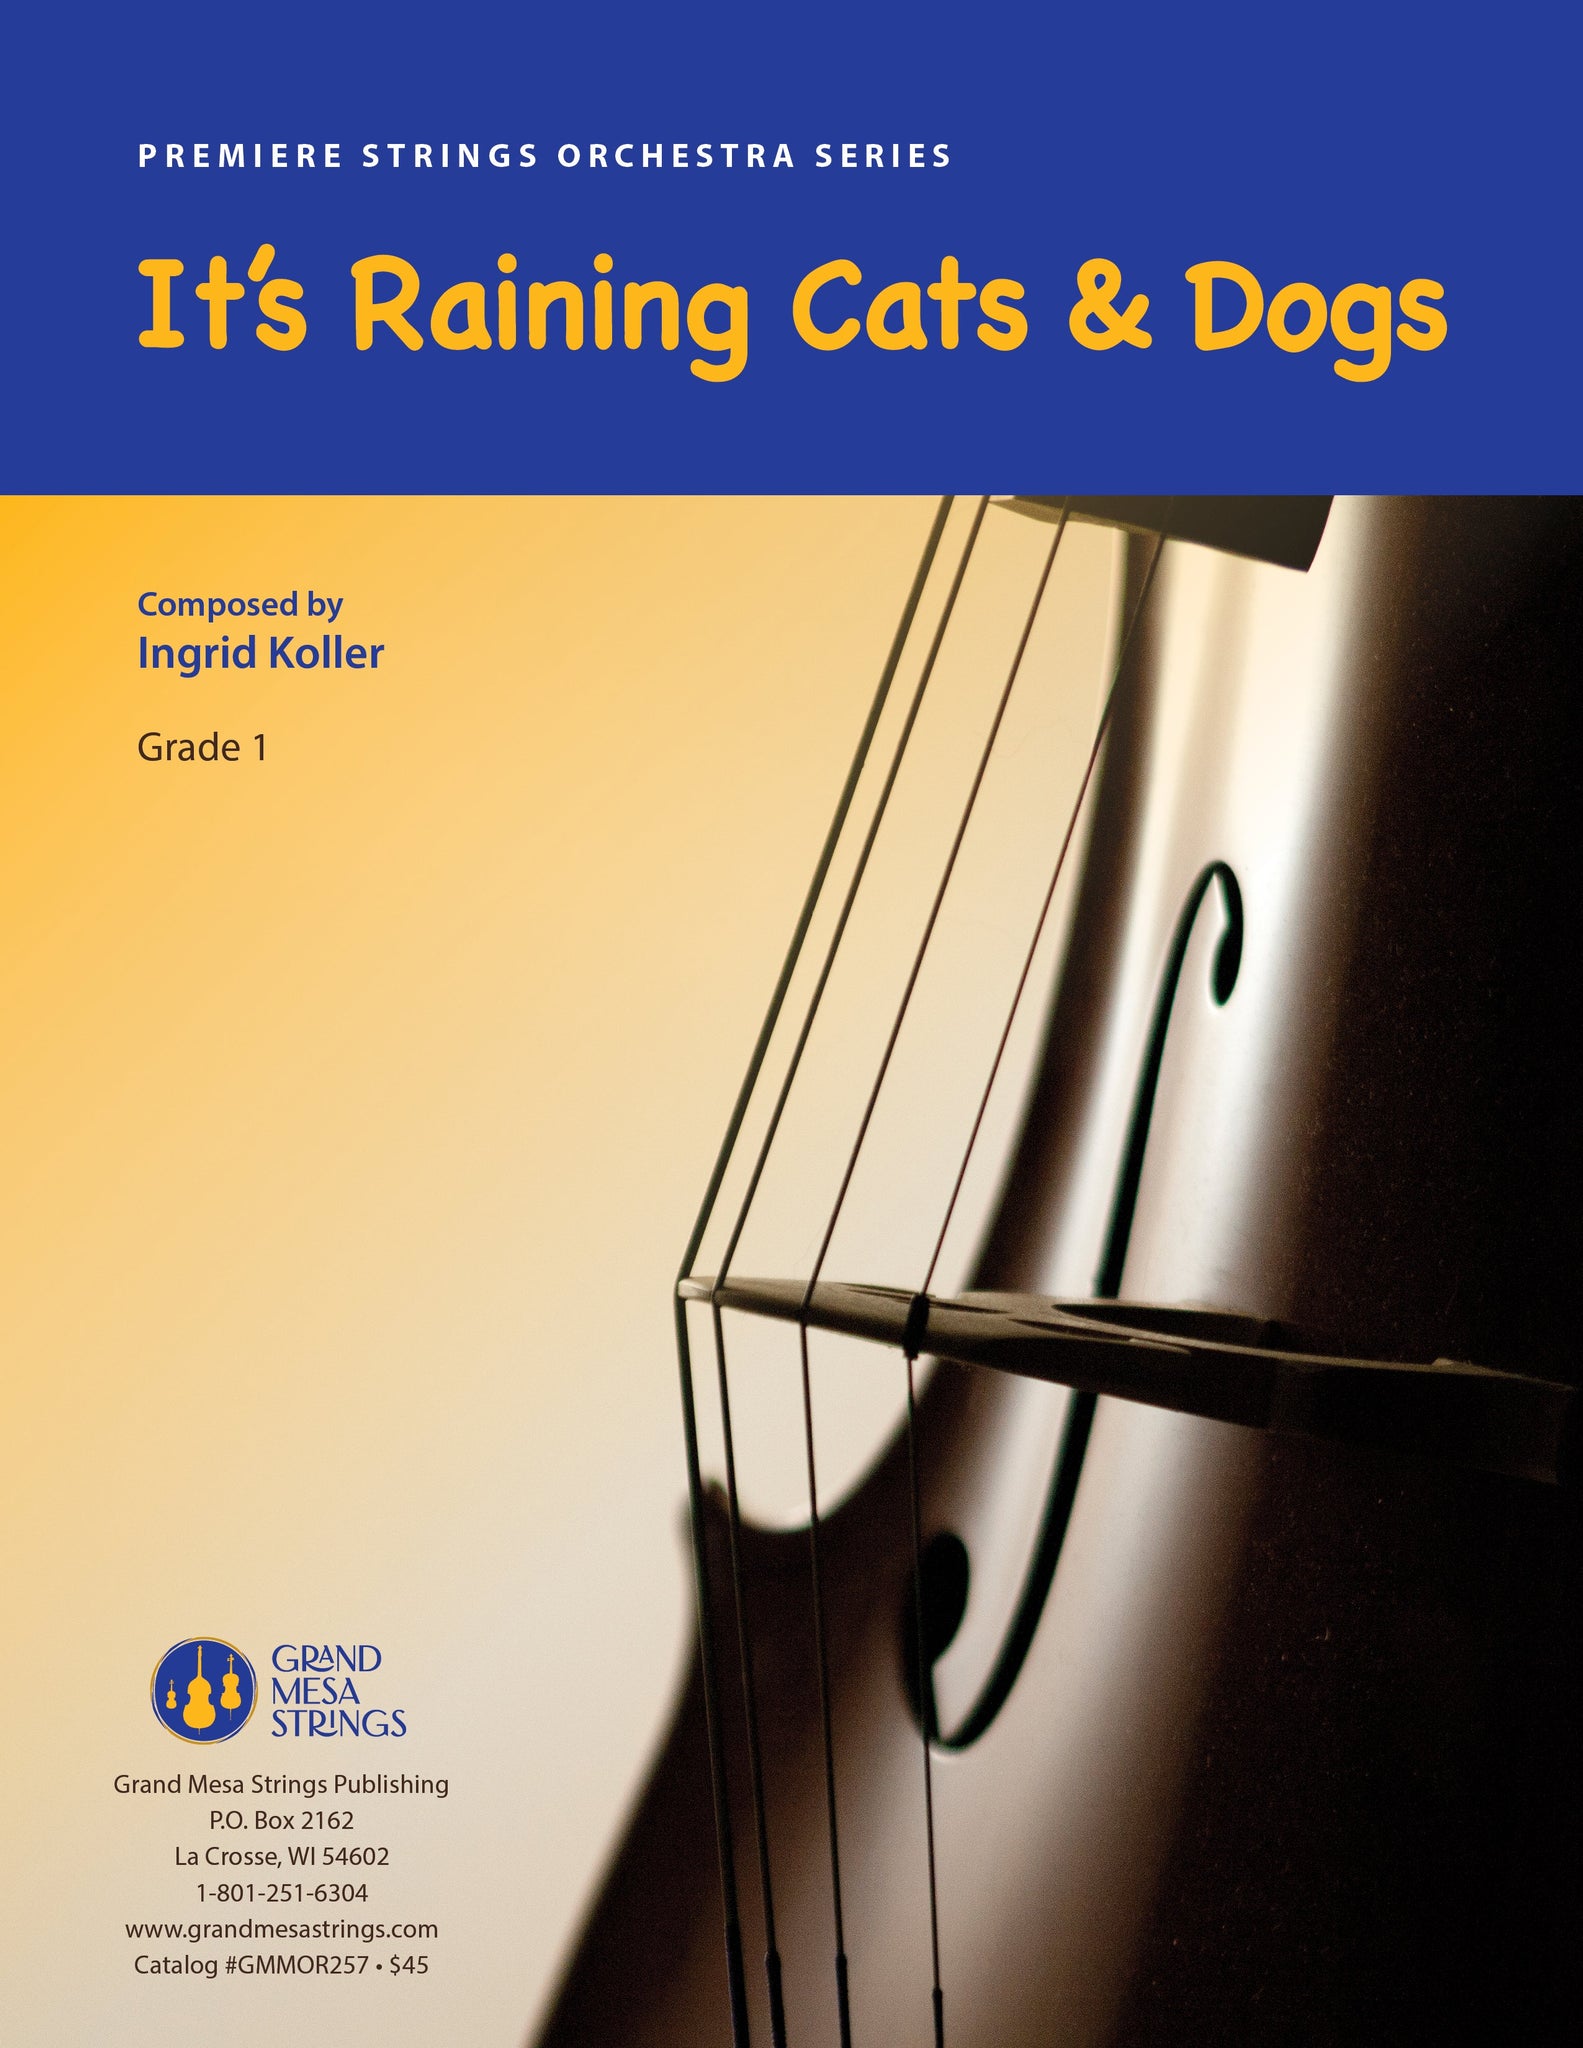 Strings sheet music cover of It's Raining Cats & Dogs, composed by Ingrid Koller.